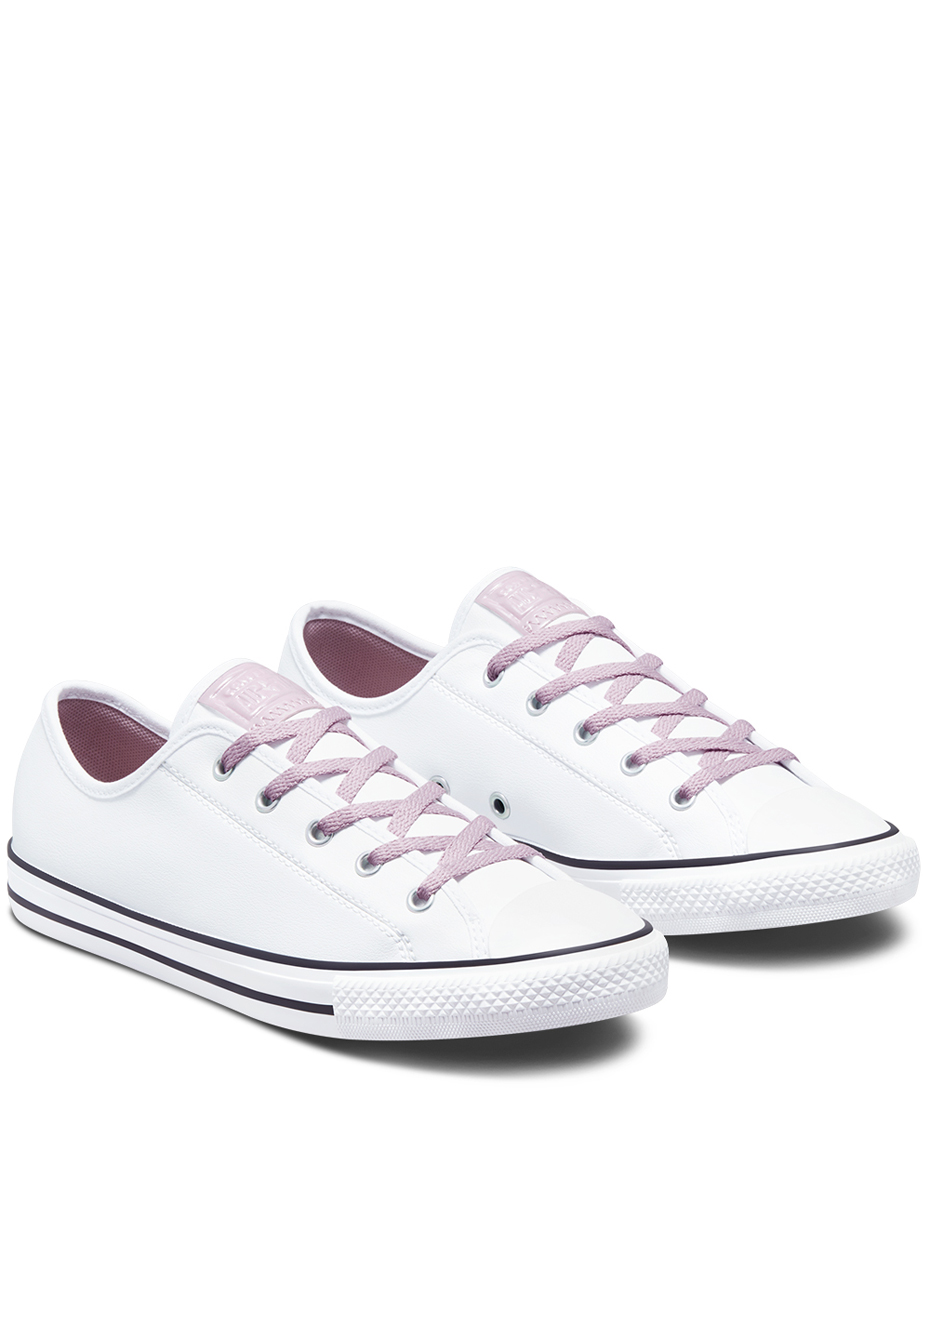 converse chuck taylor all star dainty ox white